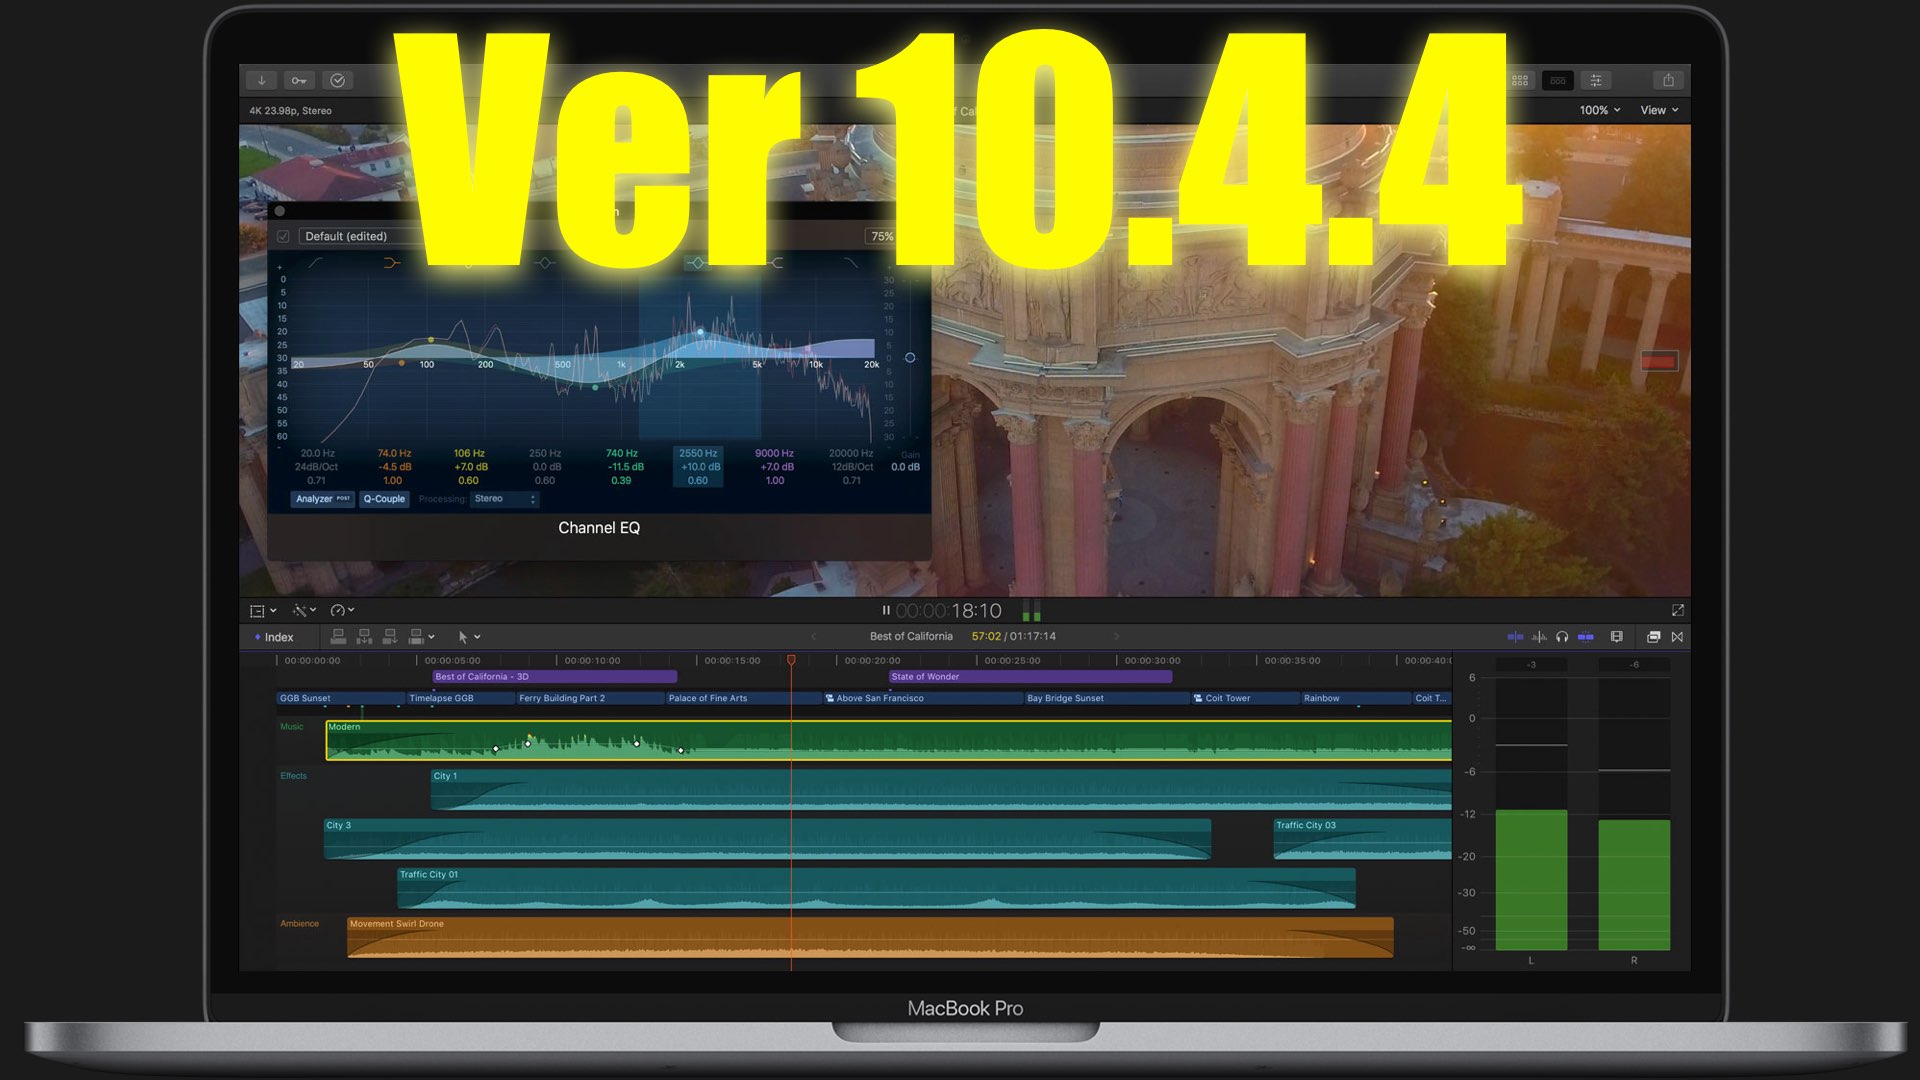 increase the size of the control icons on final cut pro x 10.3.4